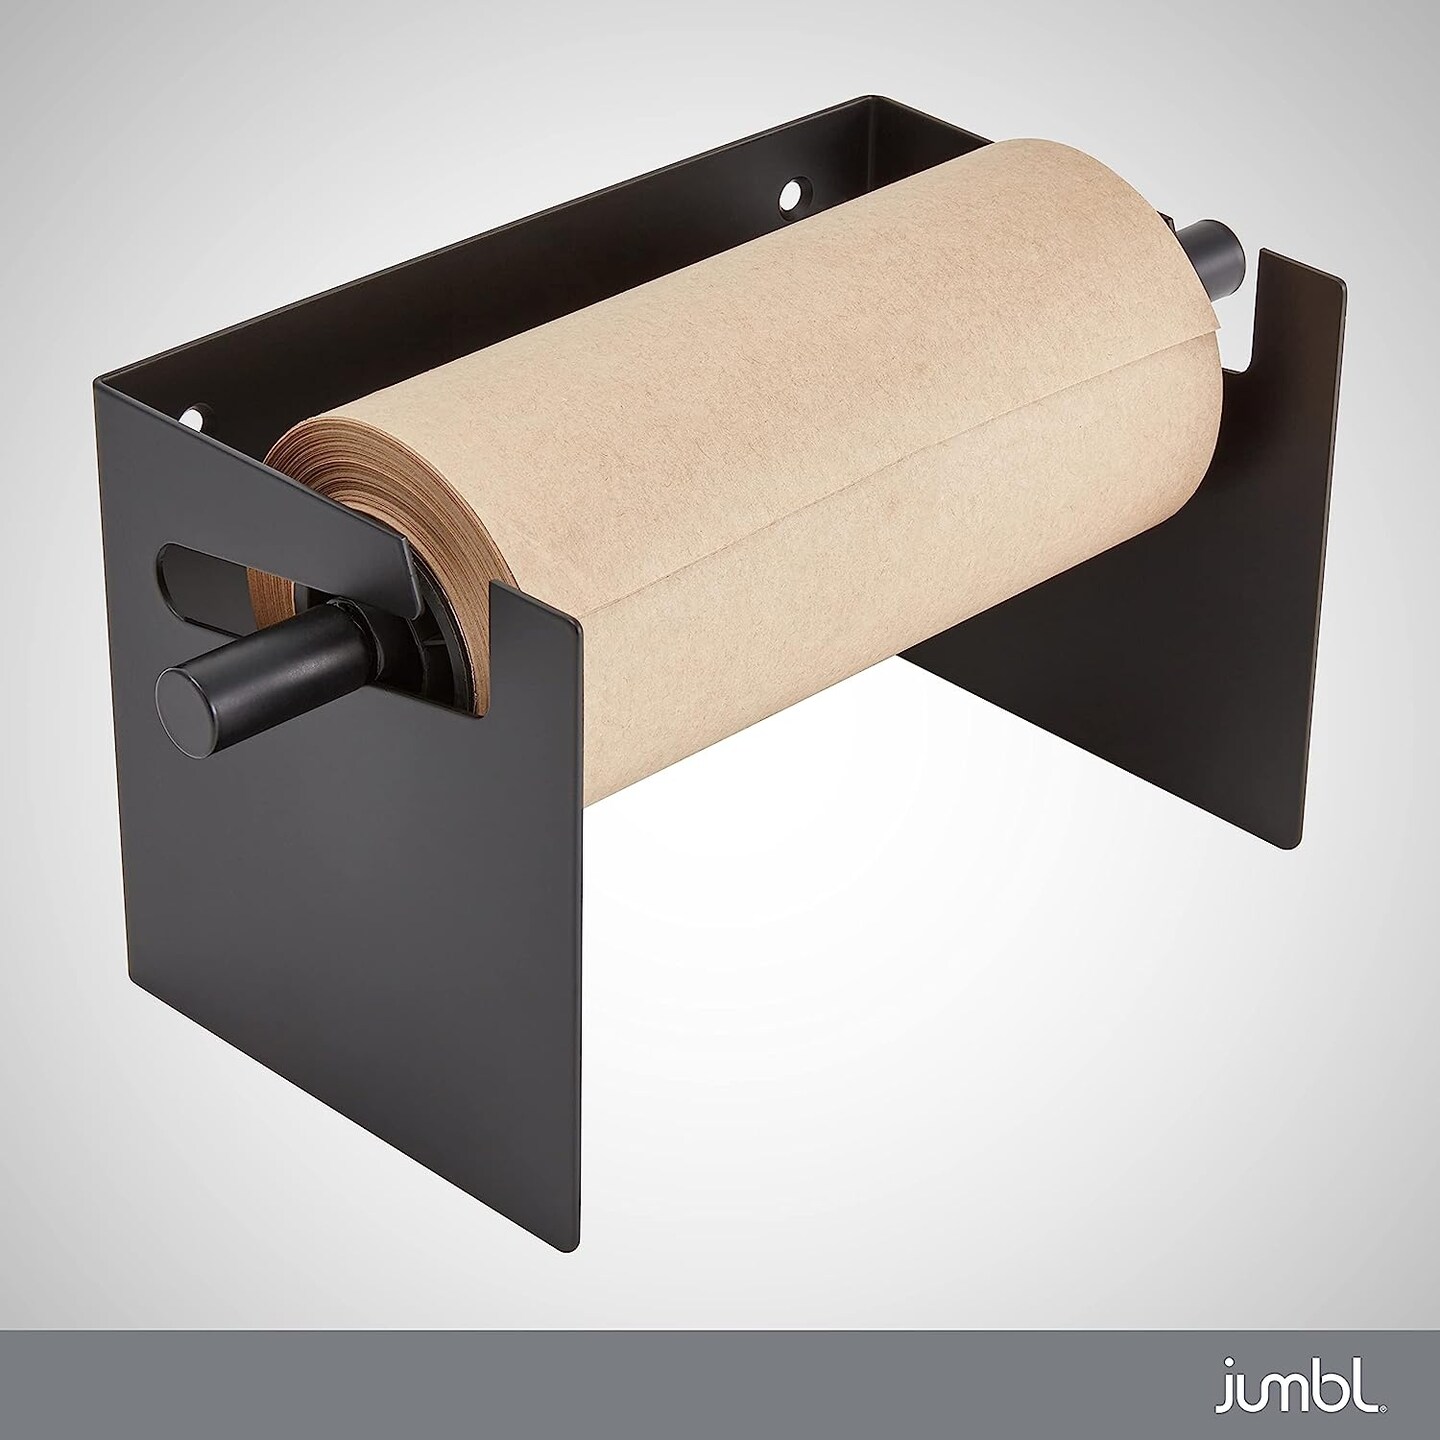  ThinkScroll 24 Inch Wall-Mounted Kraft, Butcher Paper Roll  Holder/Dispenser (Bracket Only), Black : Office Products